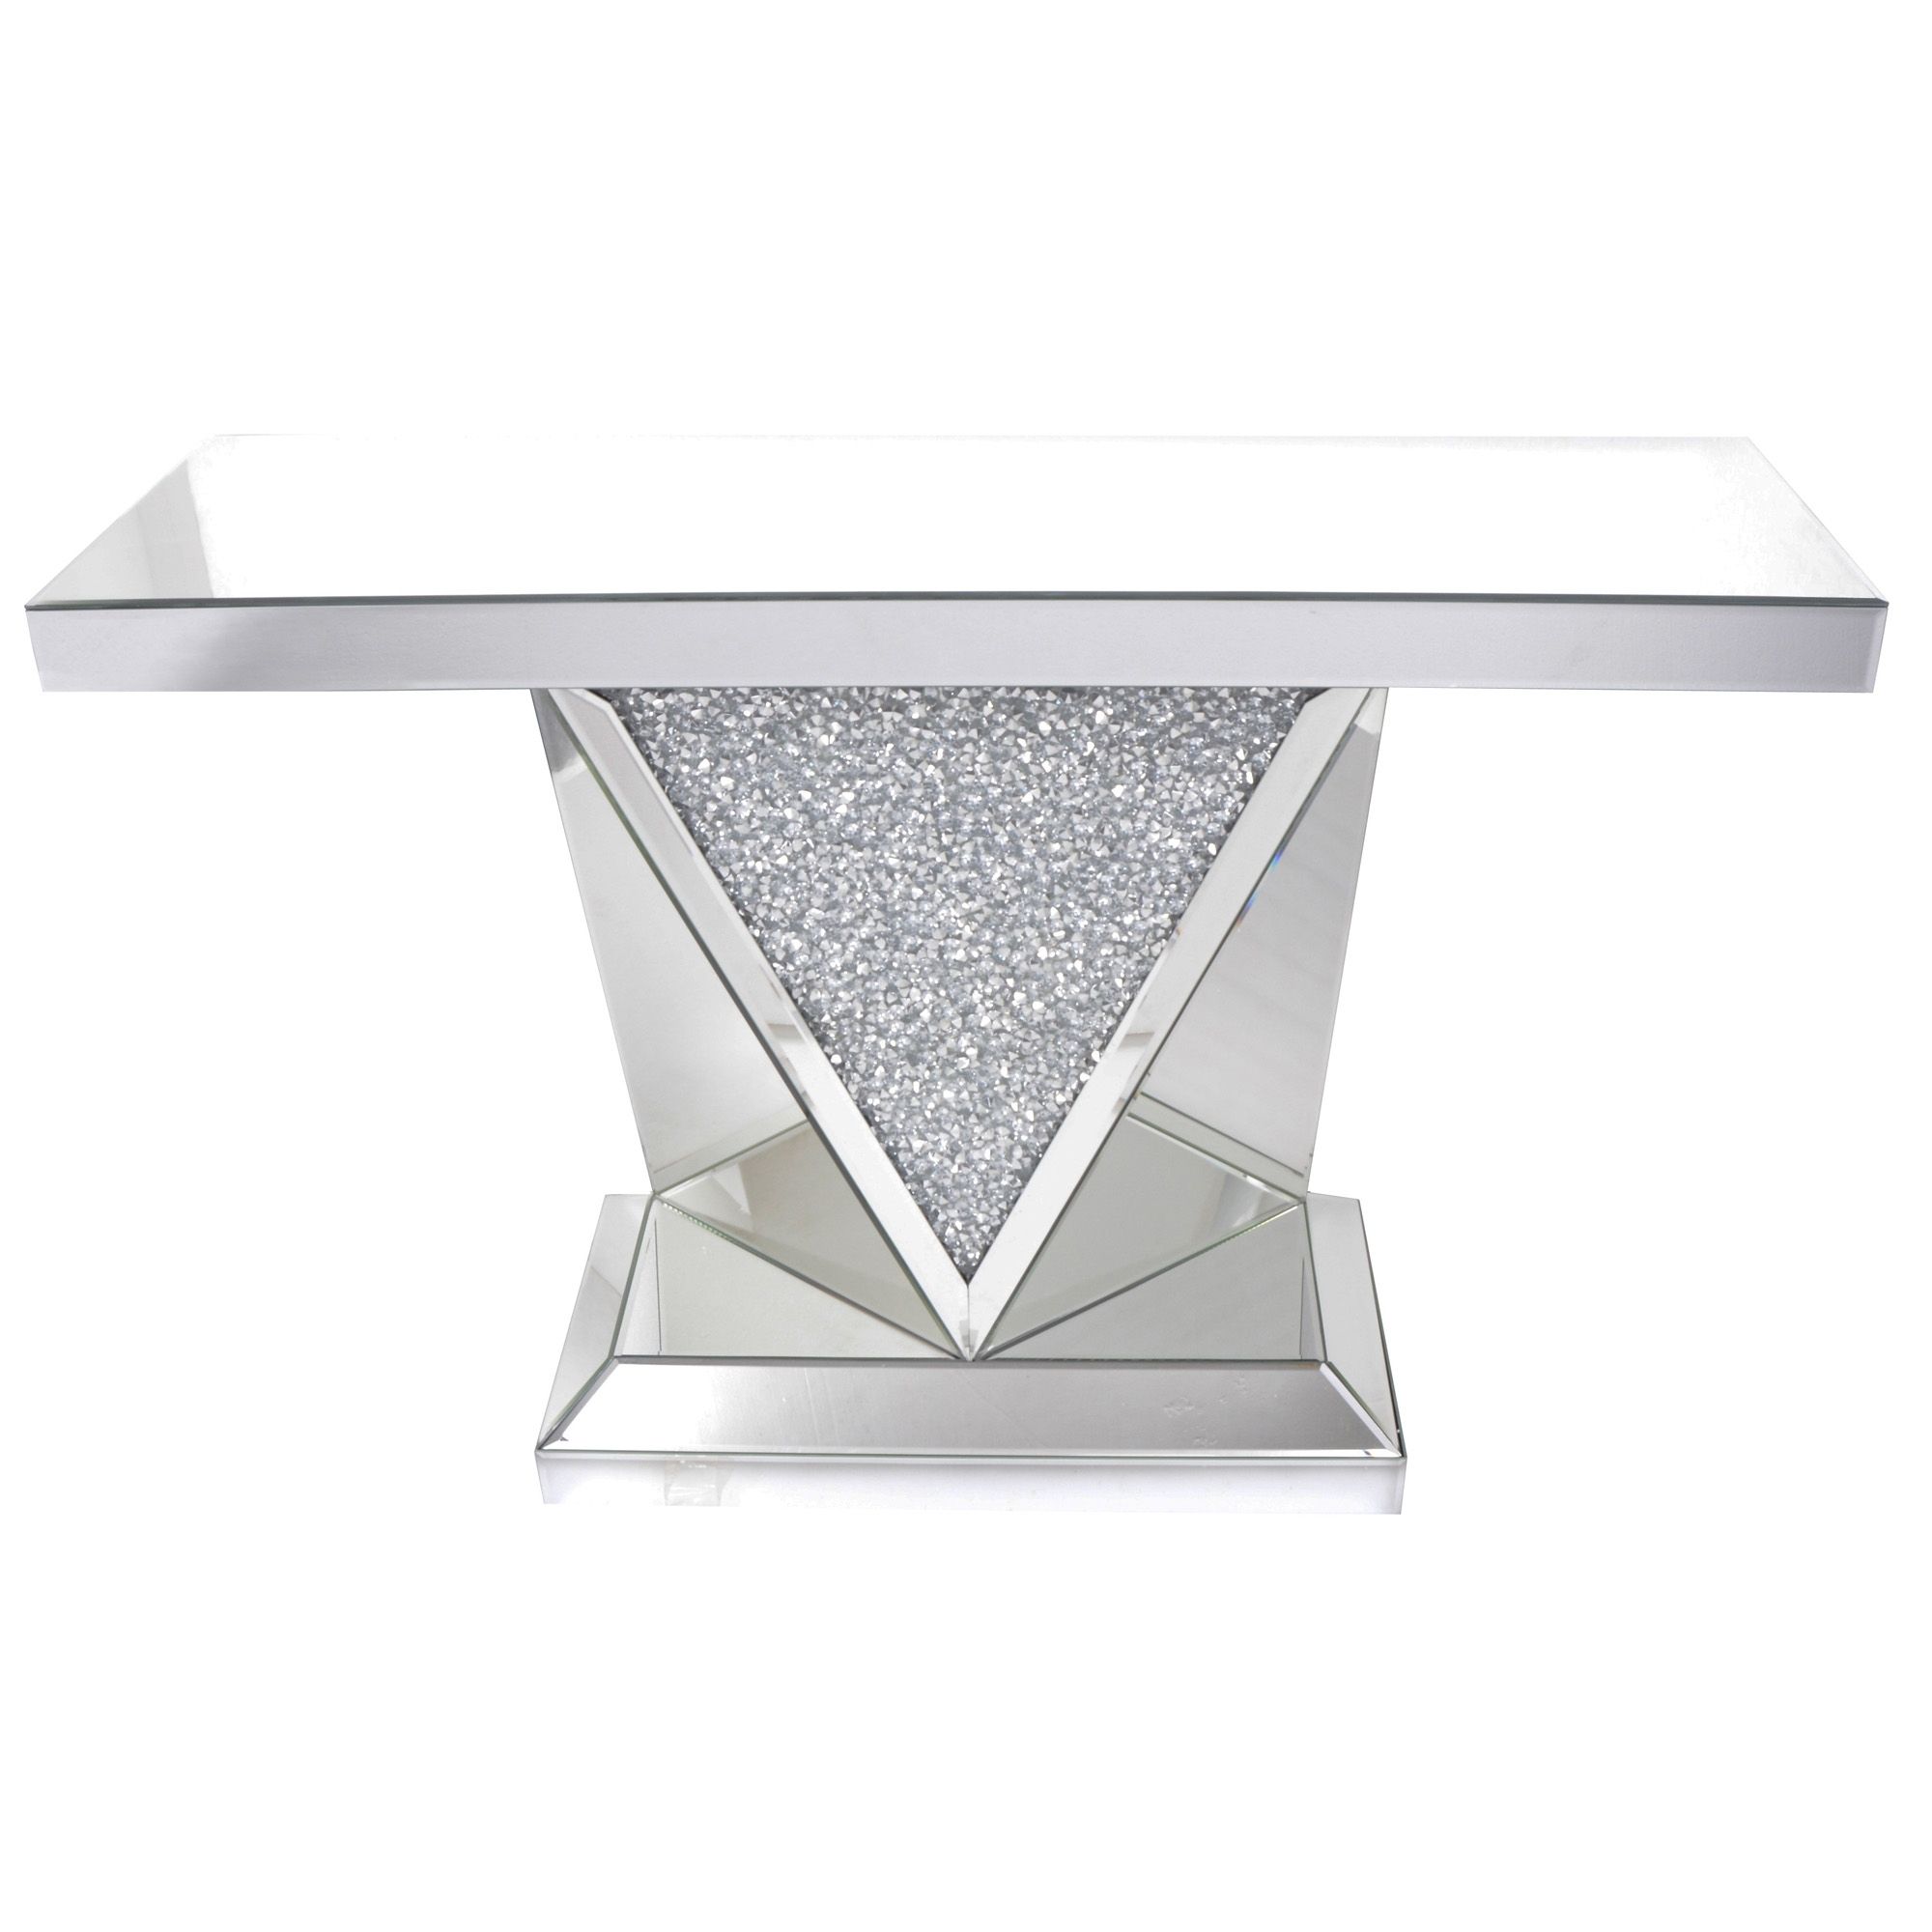 Mocka Diamond Crush Triangle Console Table | Mocka Collection With Triangular Console Tables (View 16 of 20)